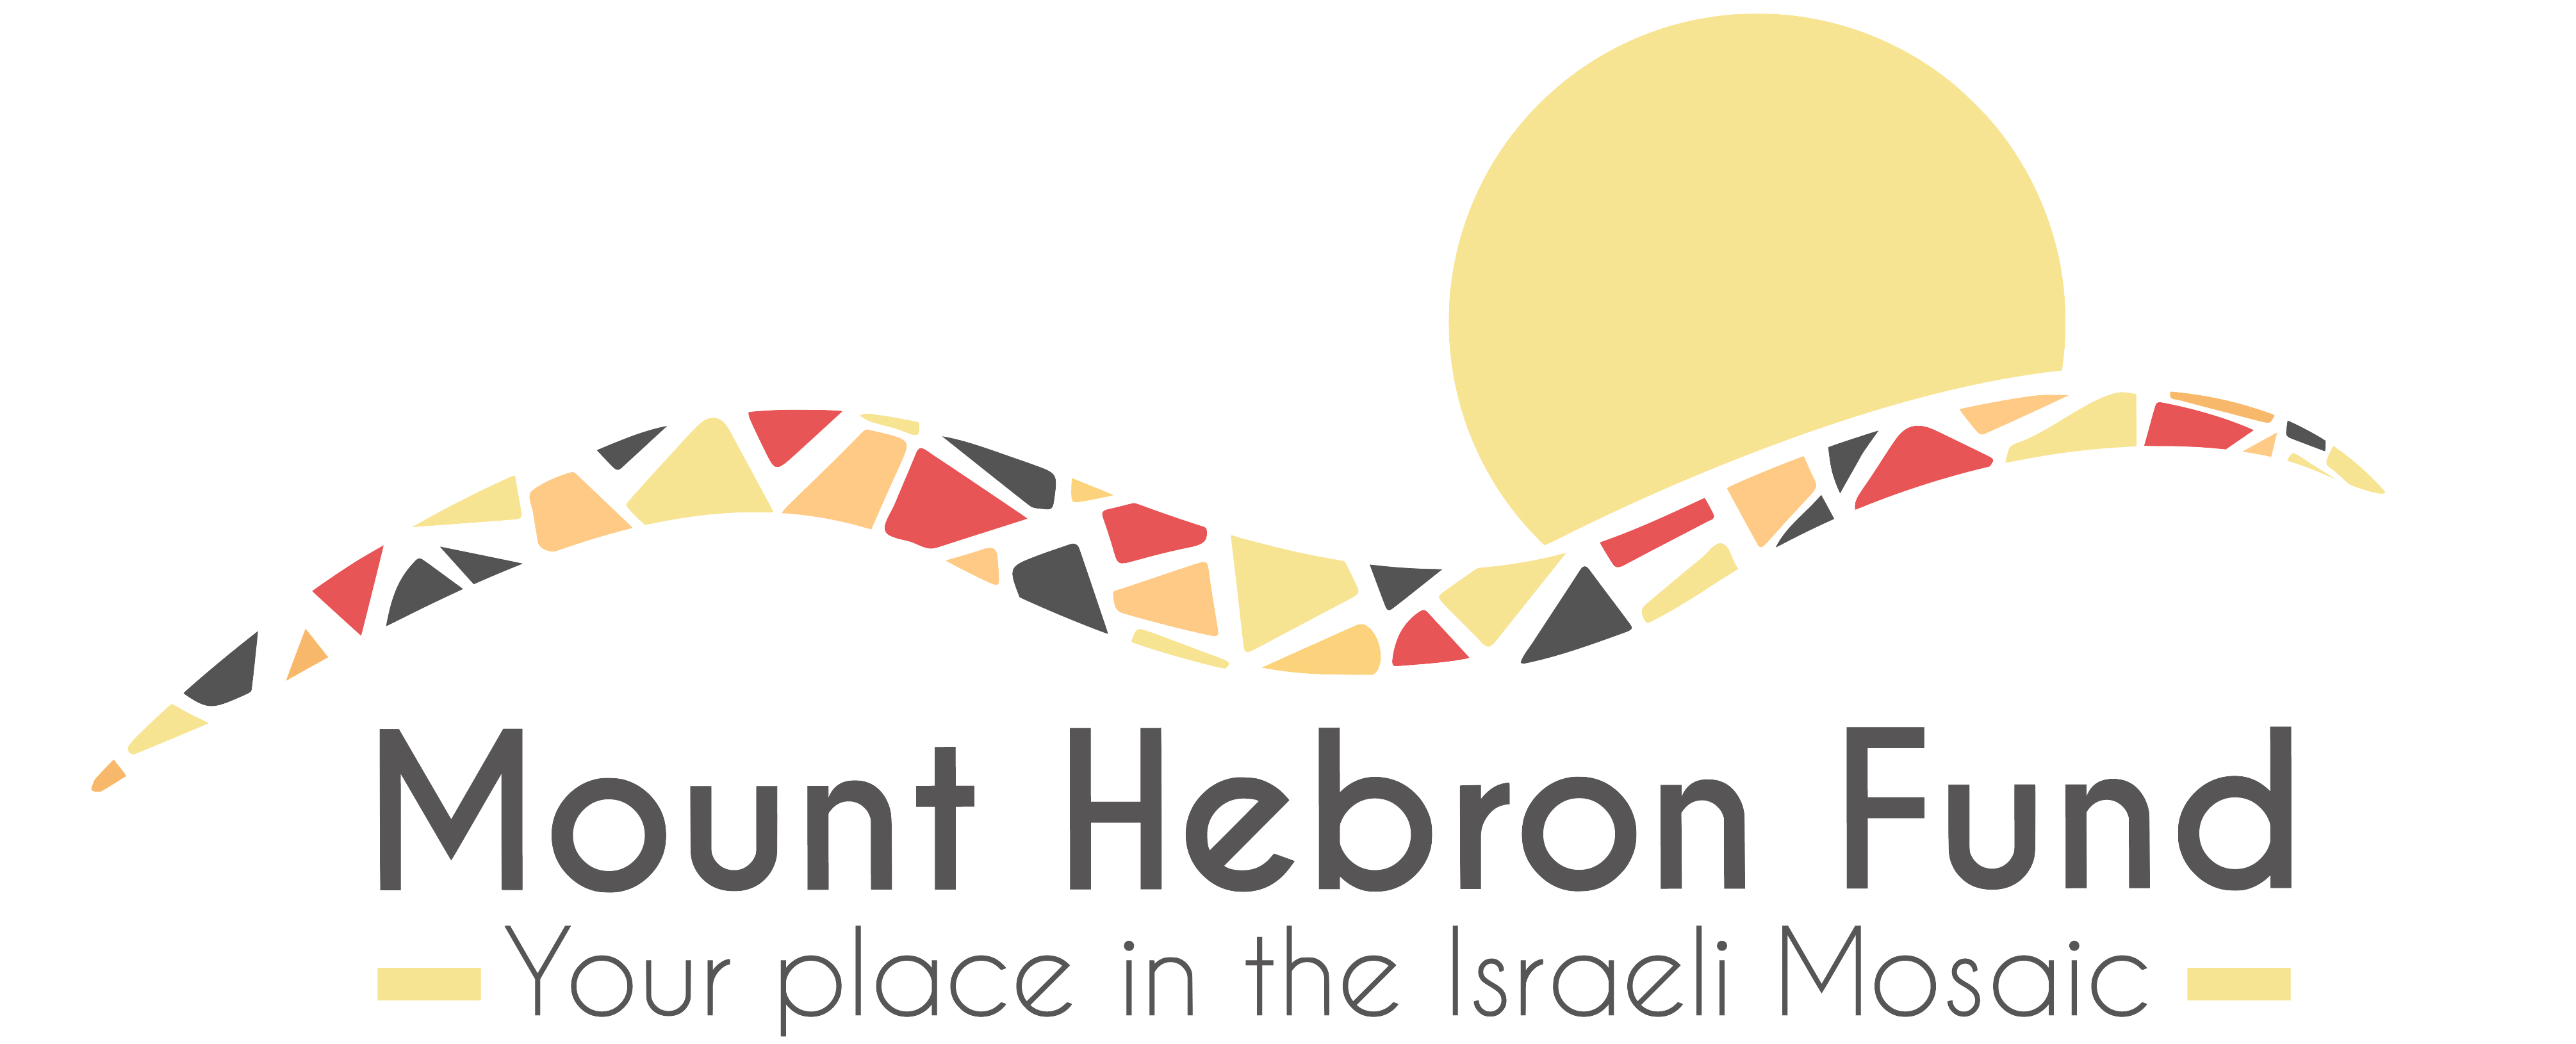 Hebron Logo - Mount Hebron Fund – Your place in the Israeli Mosaic